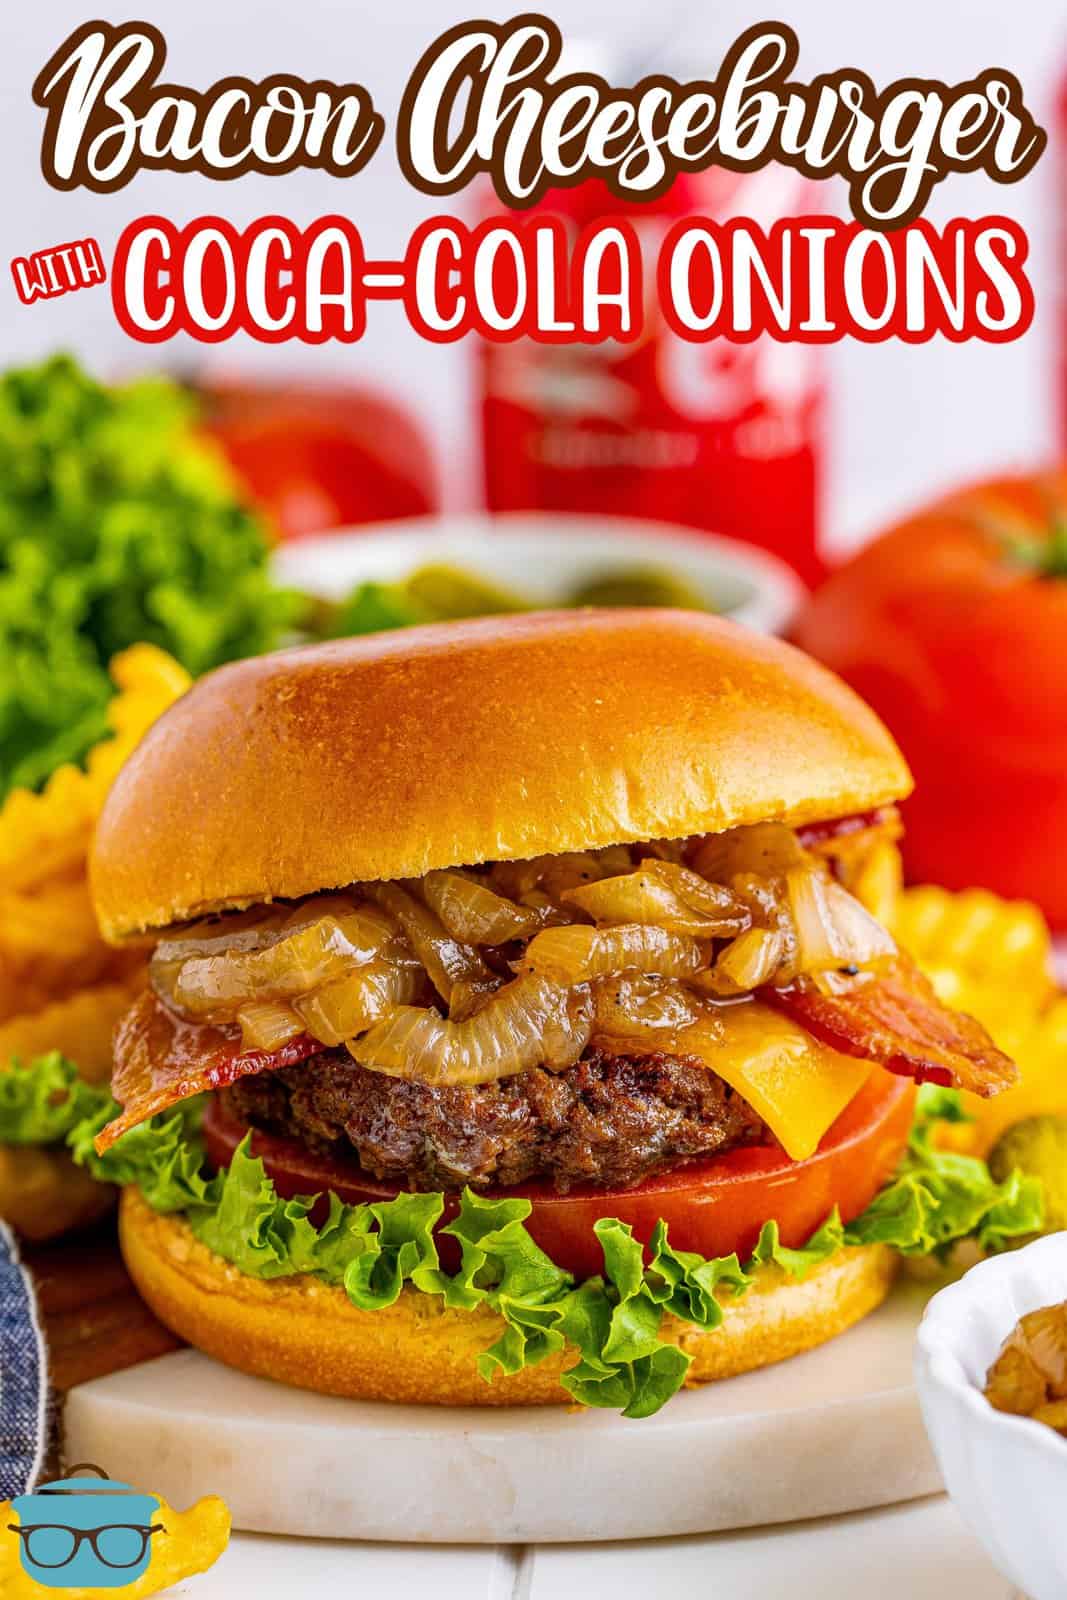 Pinterest image close up of Grilled Bacon Cheeseburgers with Coca Cola Onions on marble platter.